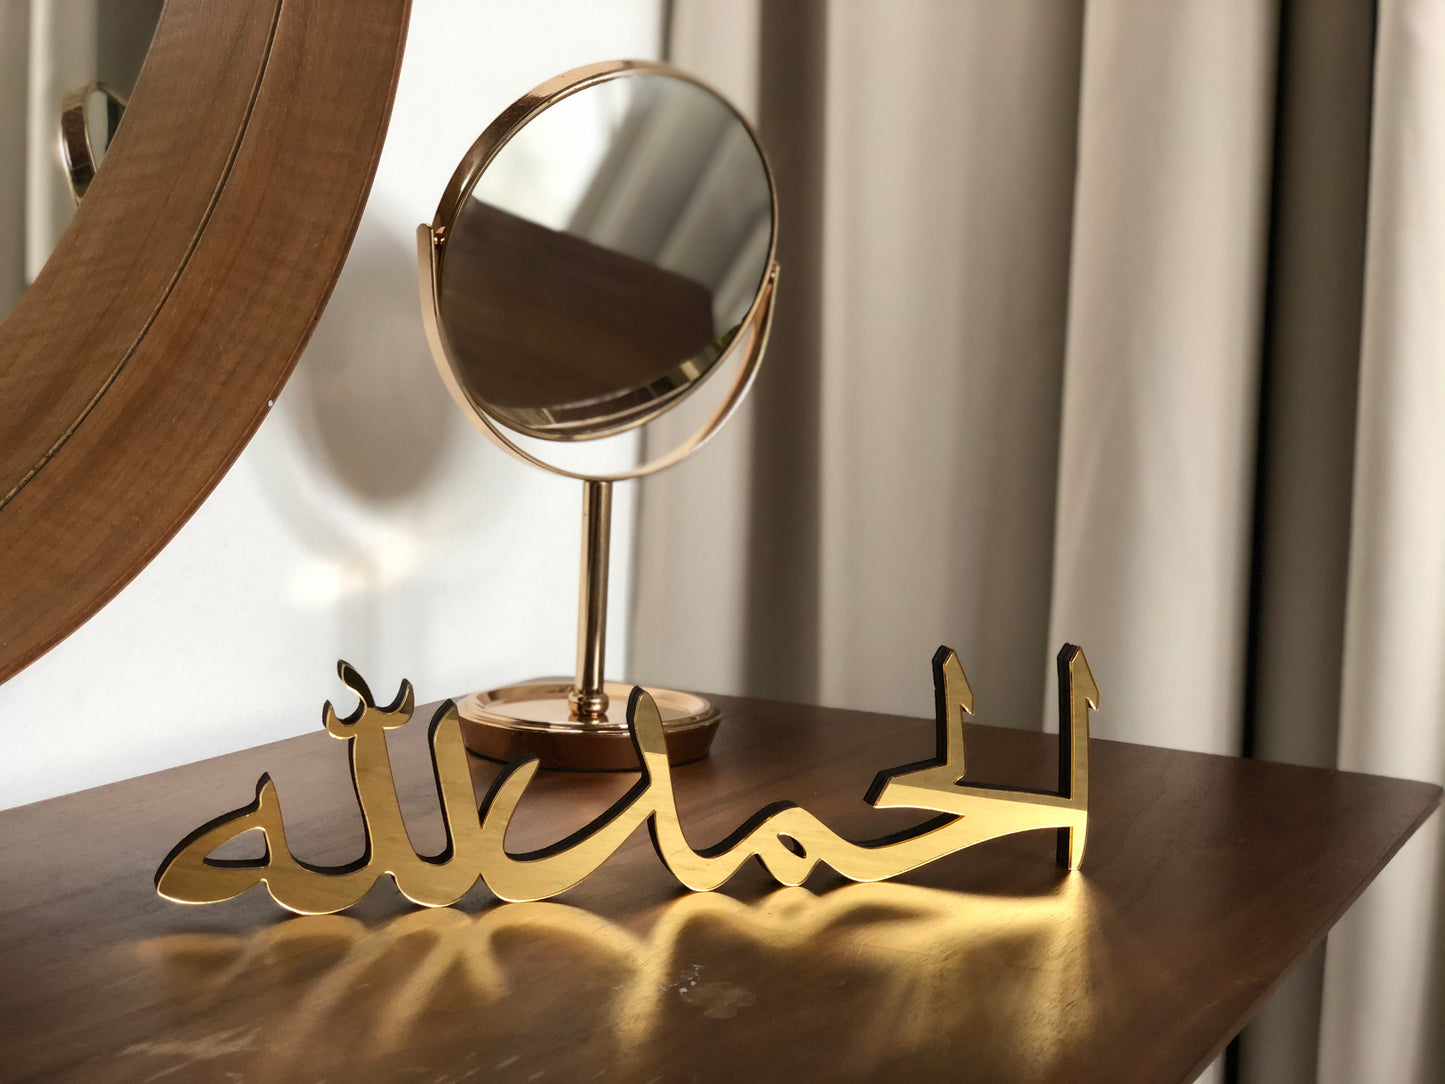 Alhamdulillah Standee in Acrylic Gold (Limited Edition)